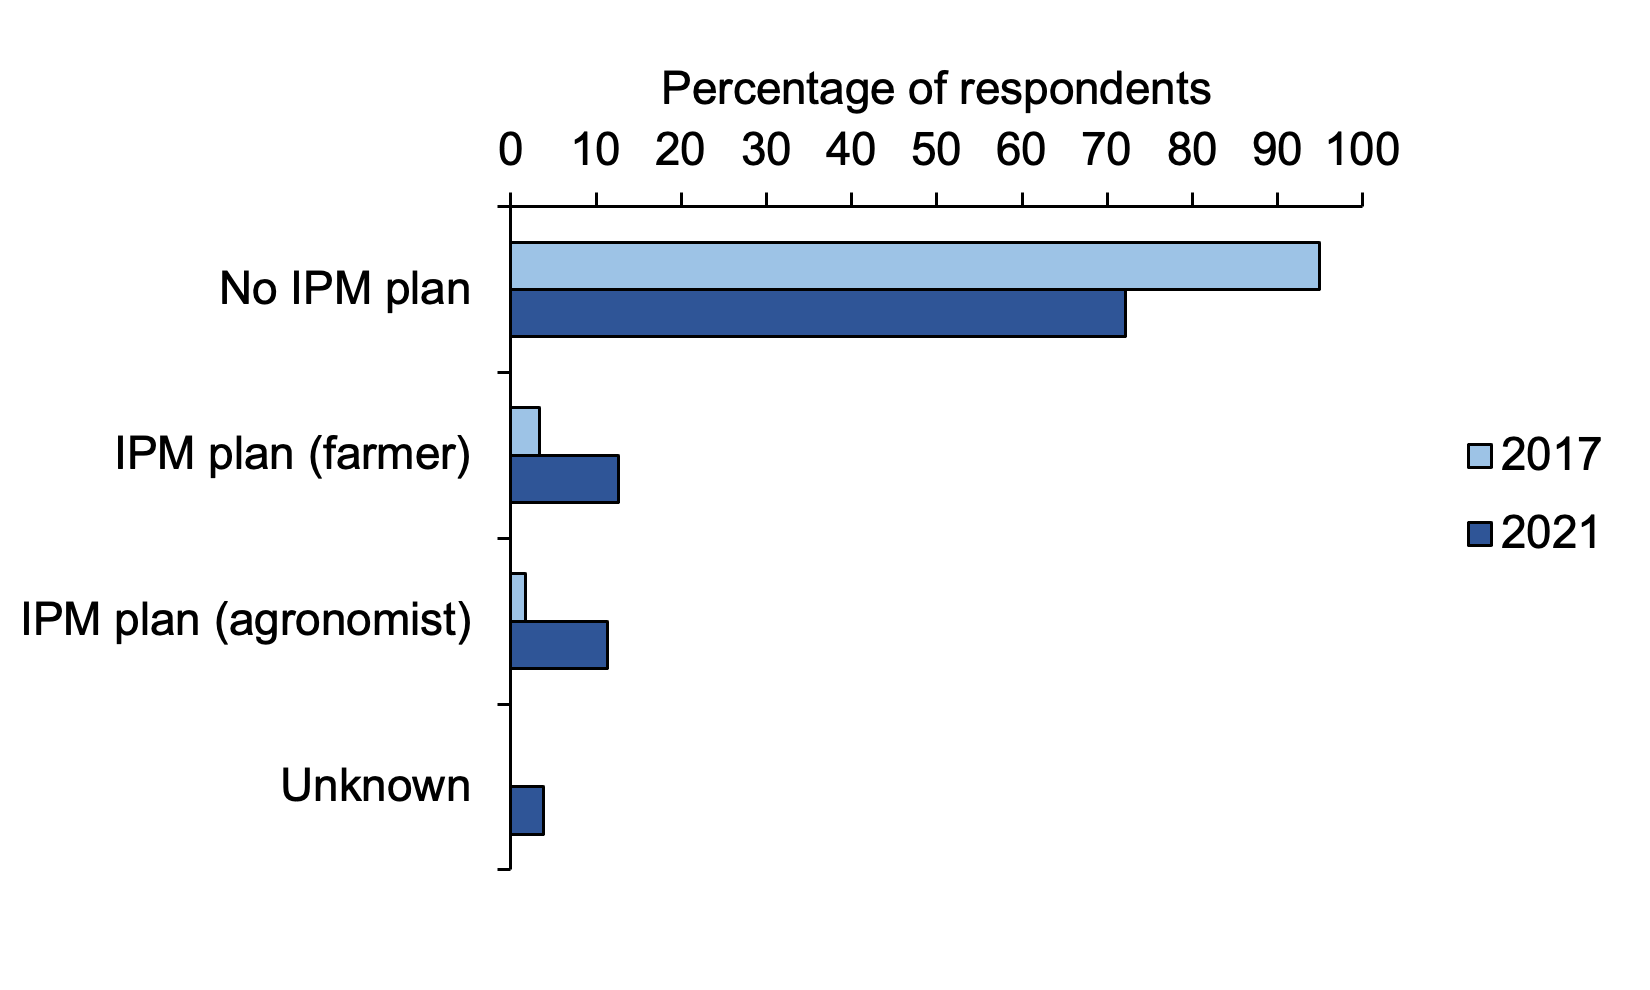 IPM: Bar chart of percentage responses to questions about IPM plans where more respondents have an IPM plan in 2021.